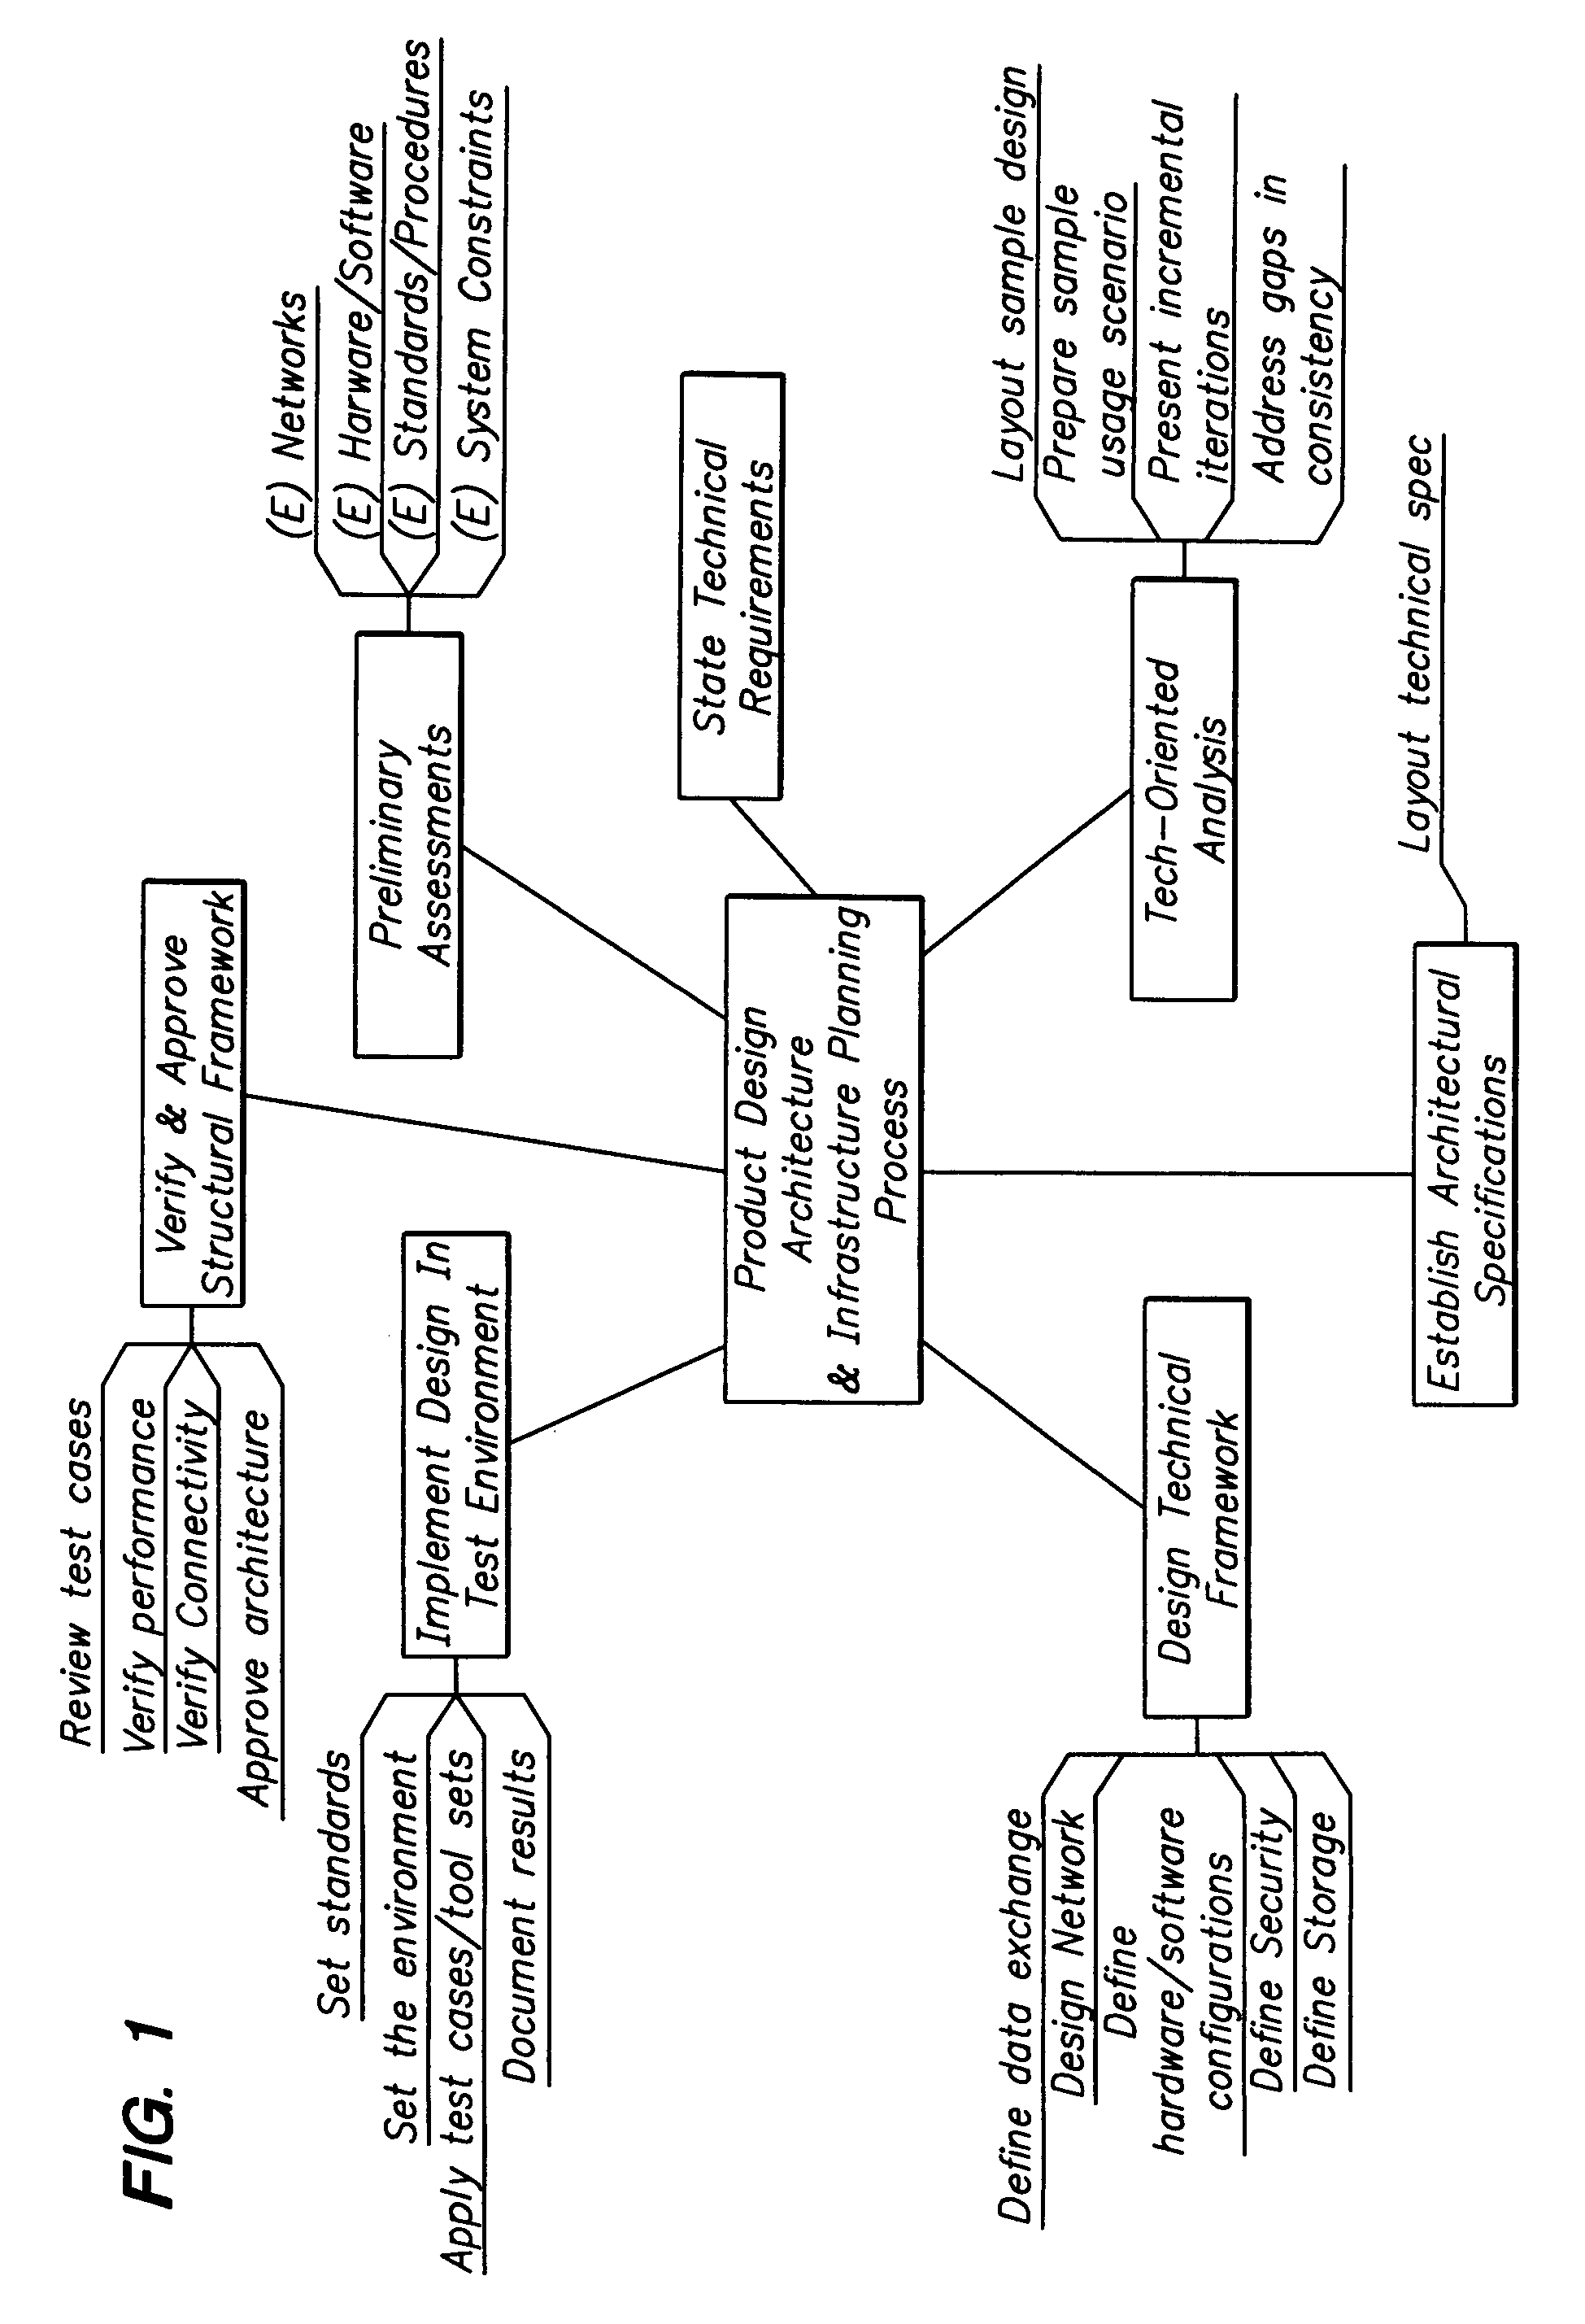 System and method for graphically illustrating external data source information in the form of a visual hierarchy in an electronic workspace